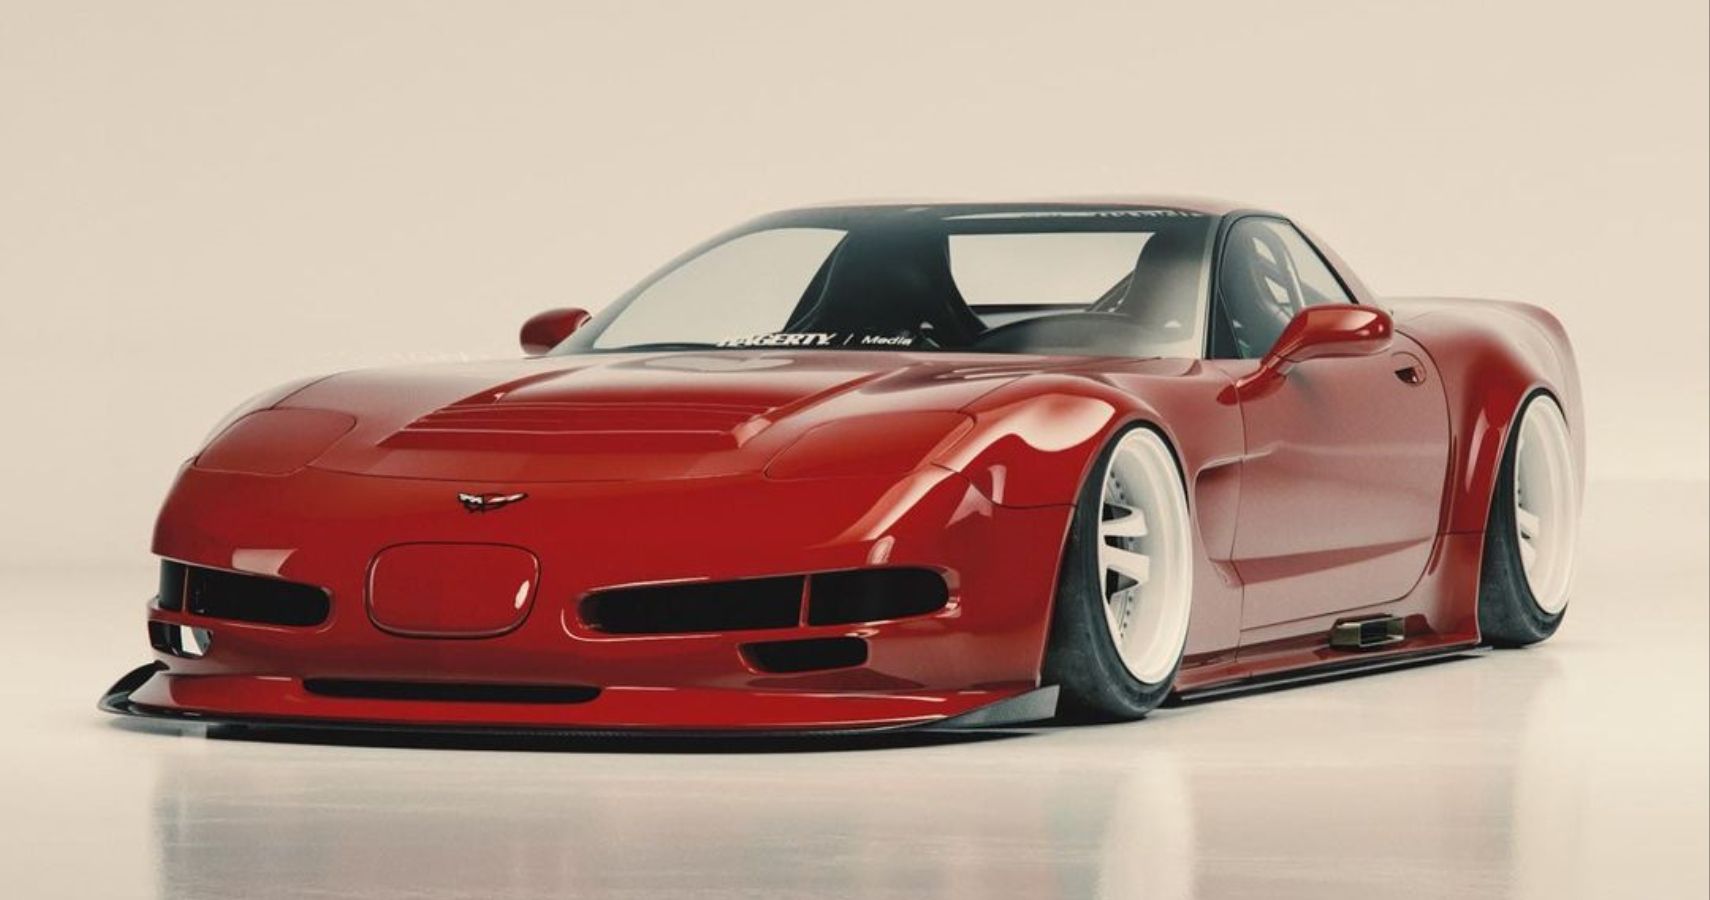 Kyza JDM Corvette Rendering Featured Image